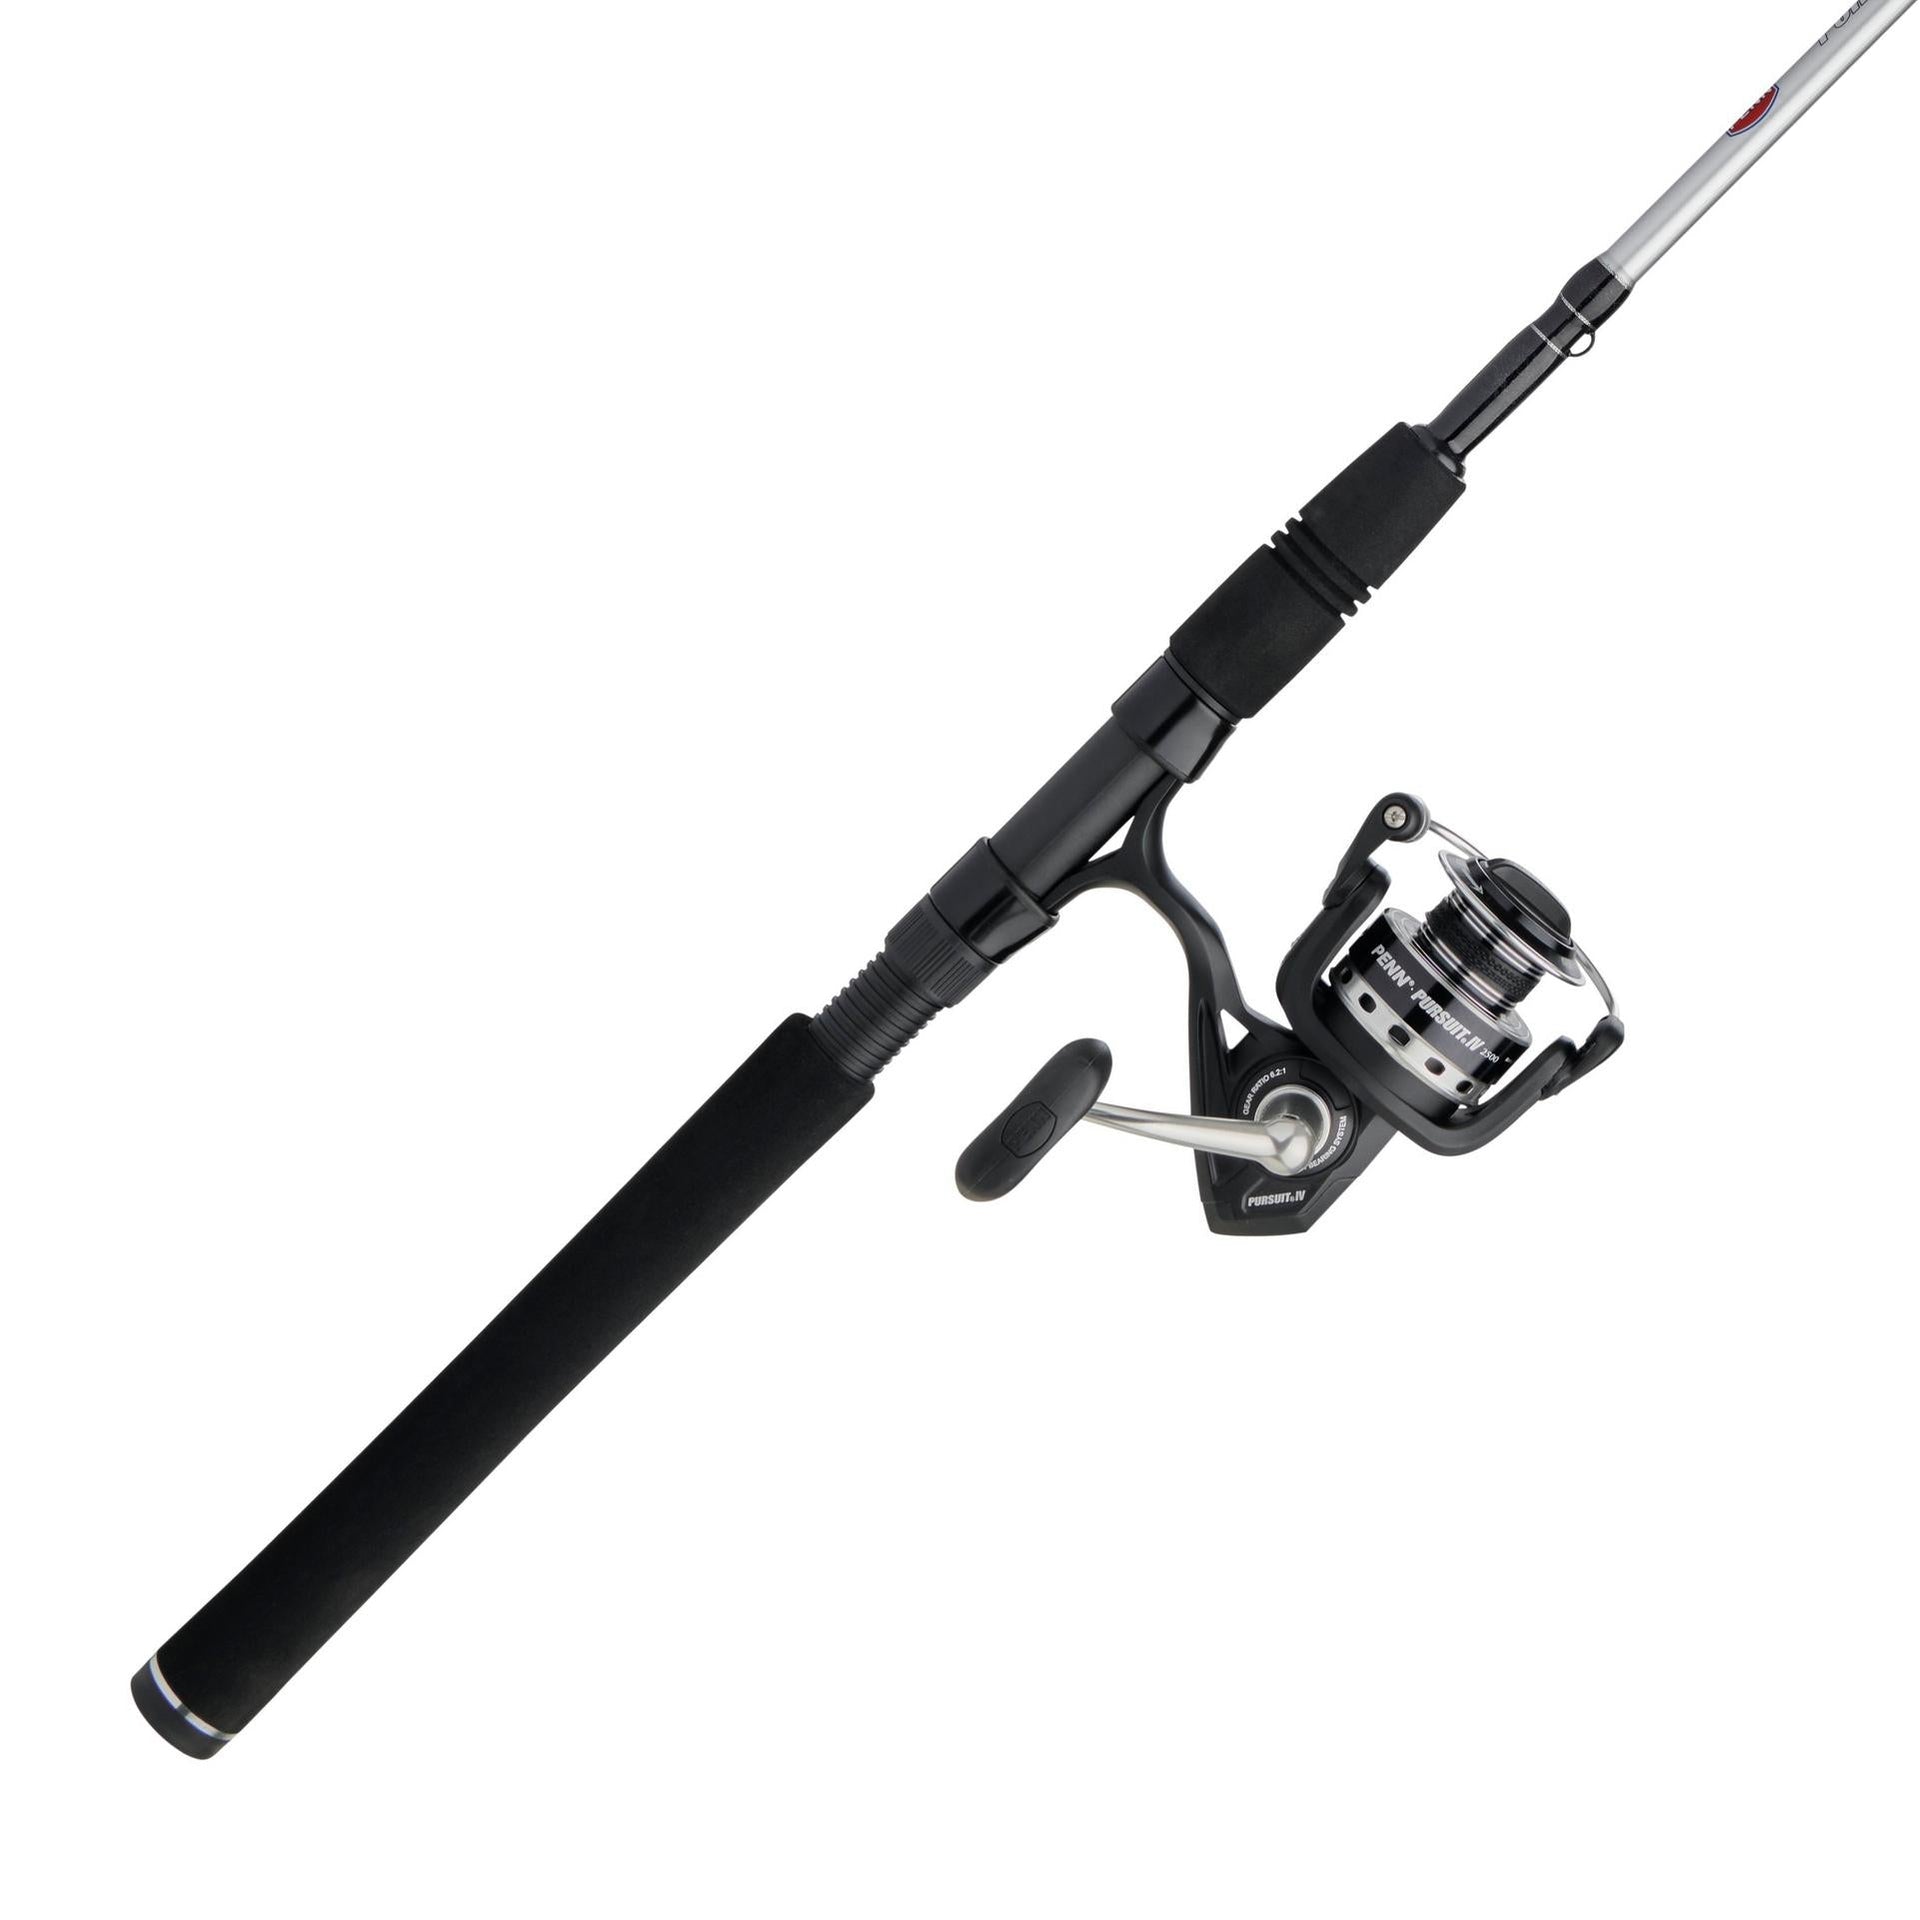 inshore fishing rods and reels - Online Exclusive Rate- OFF 63%